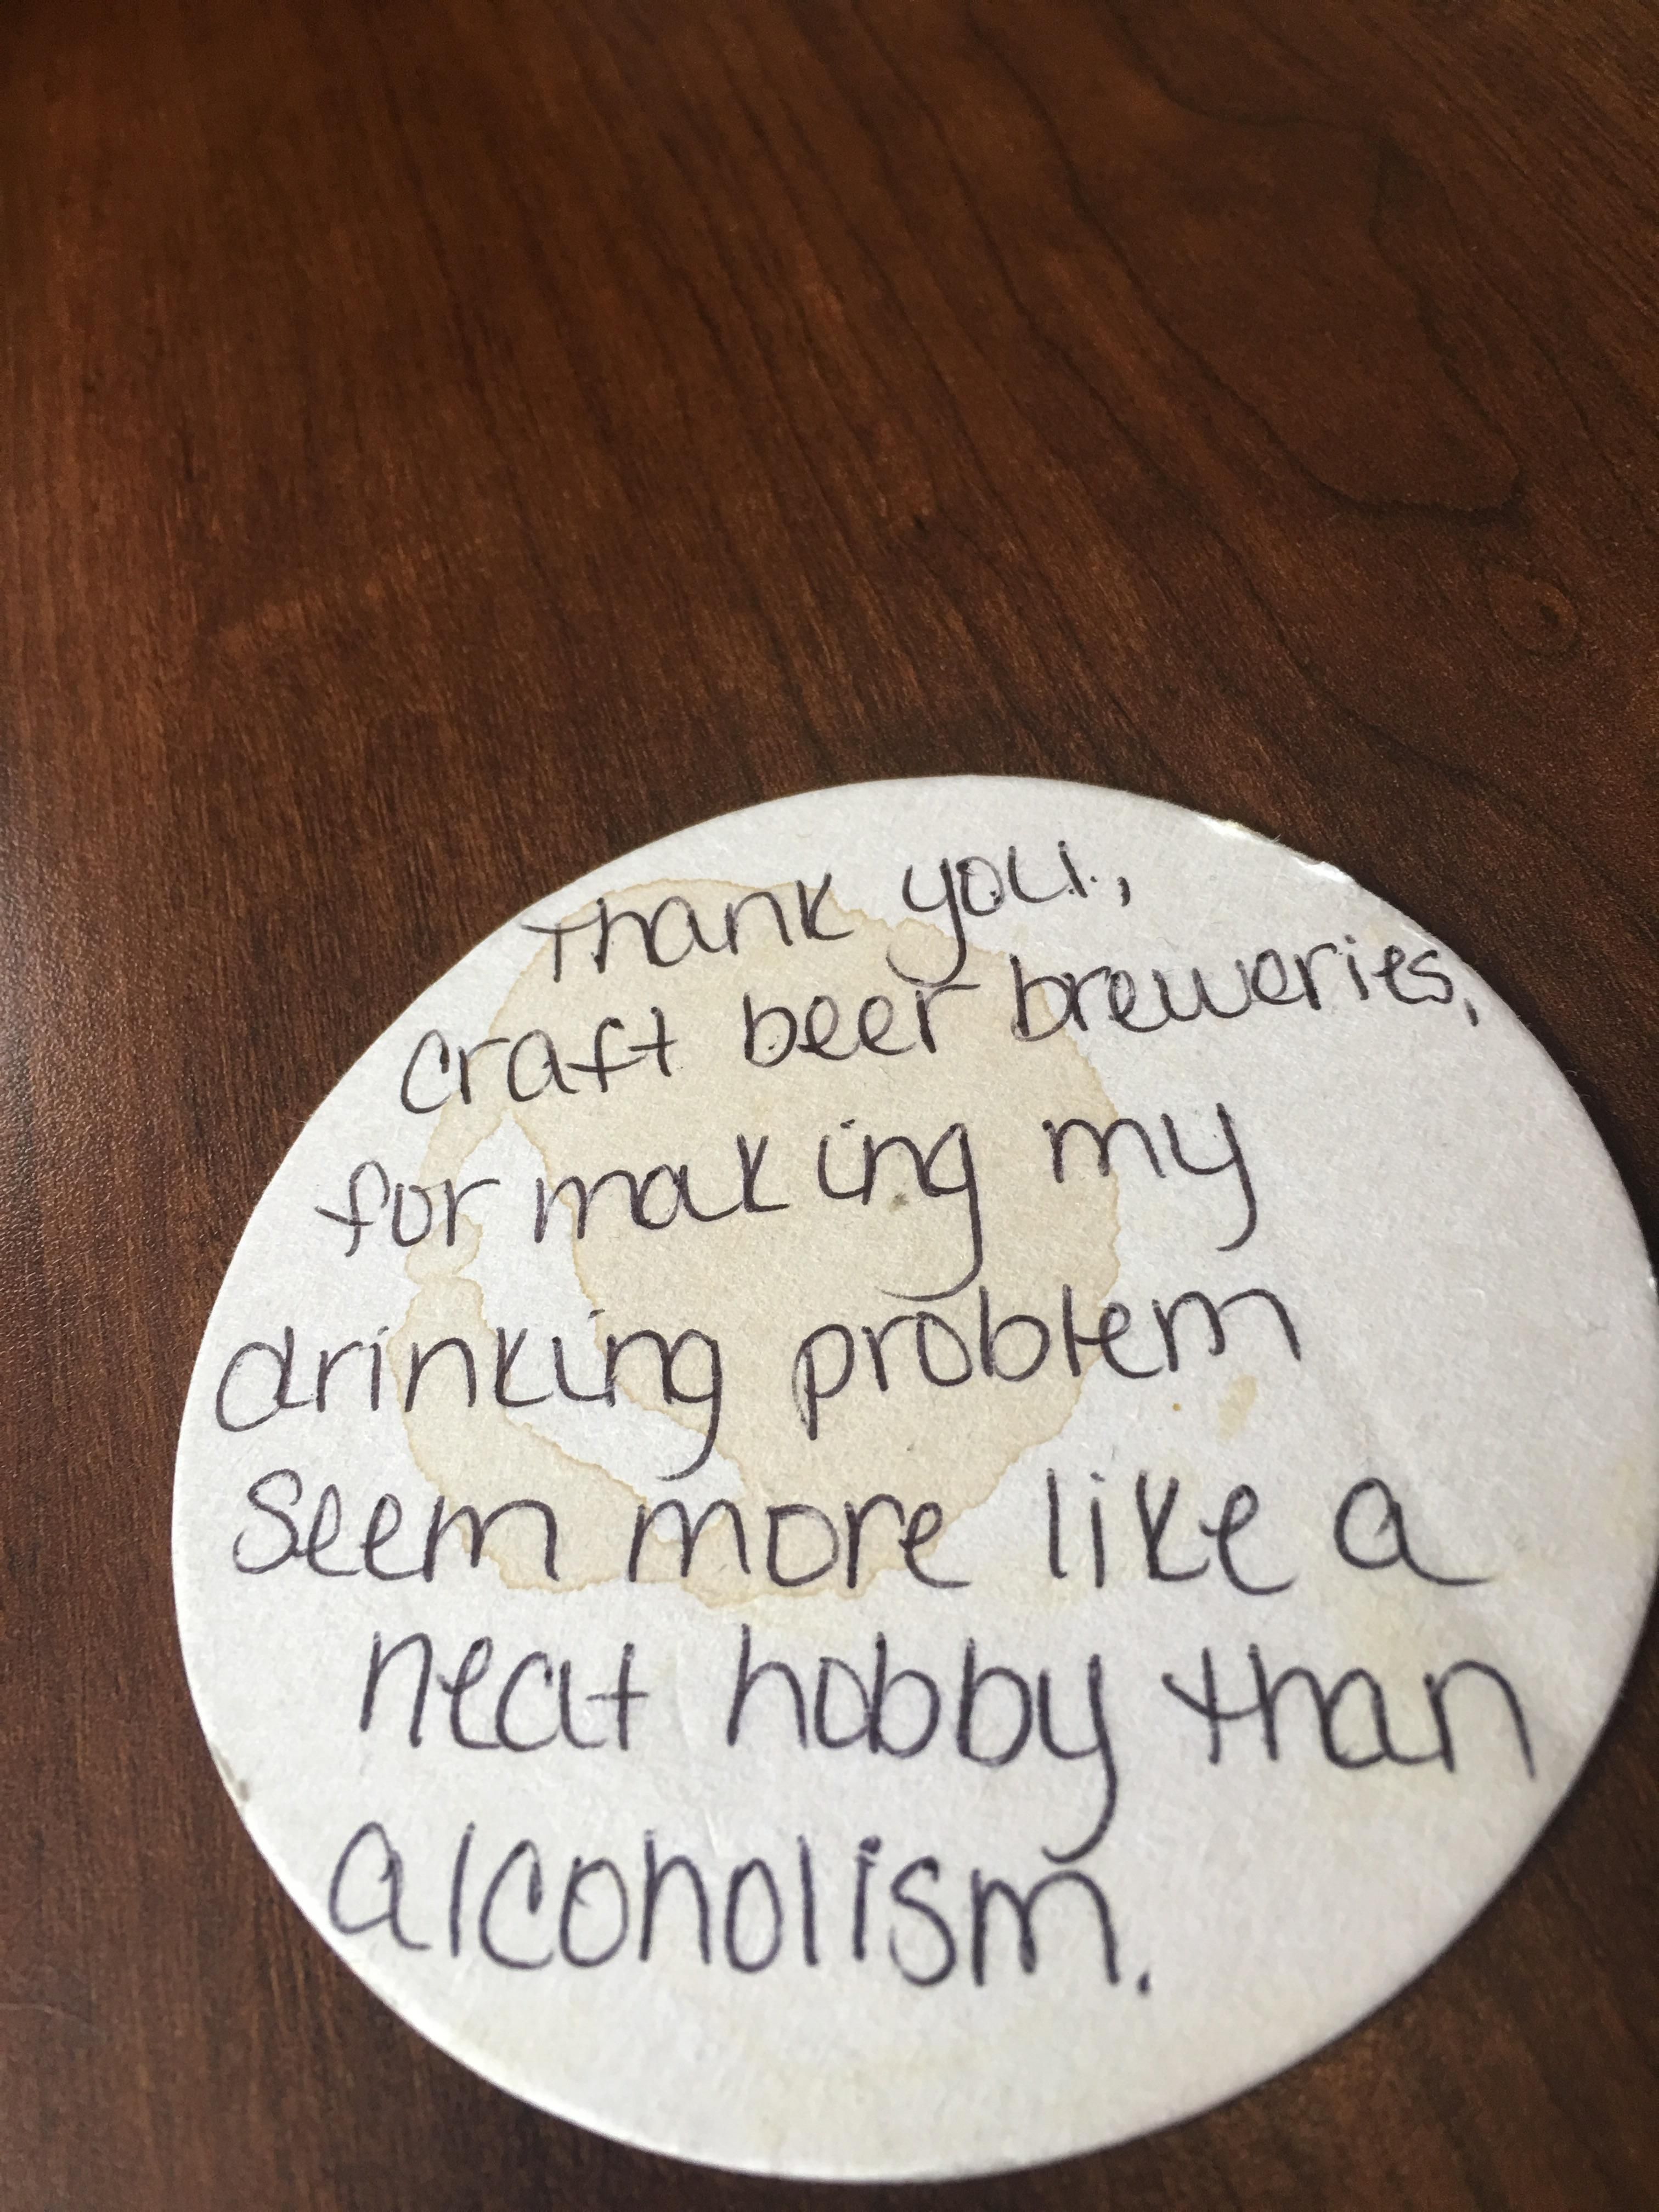 A note left on the coaster of a local brew pub.